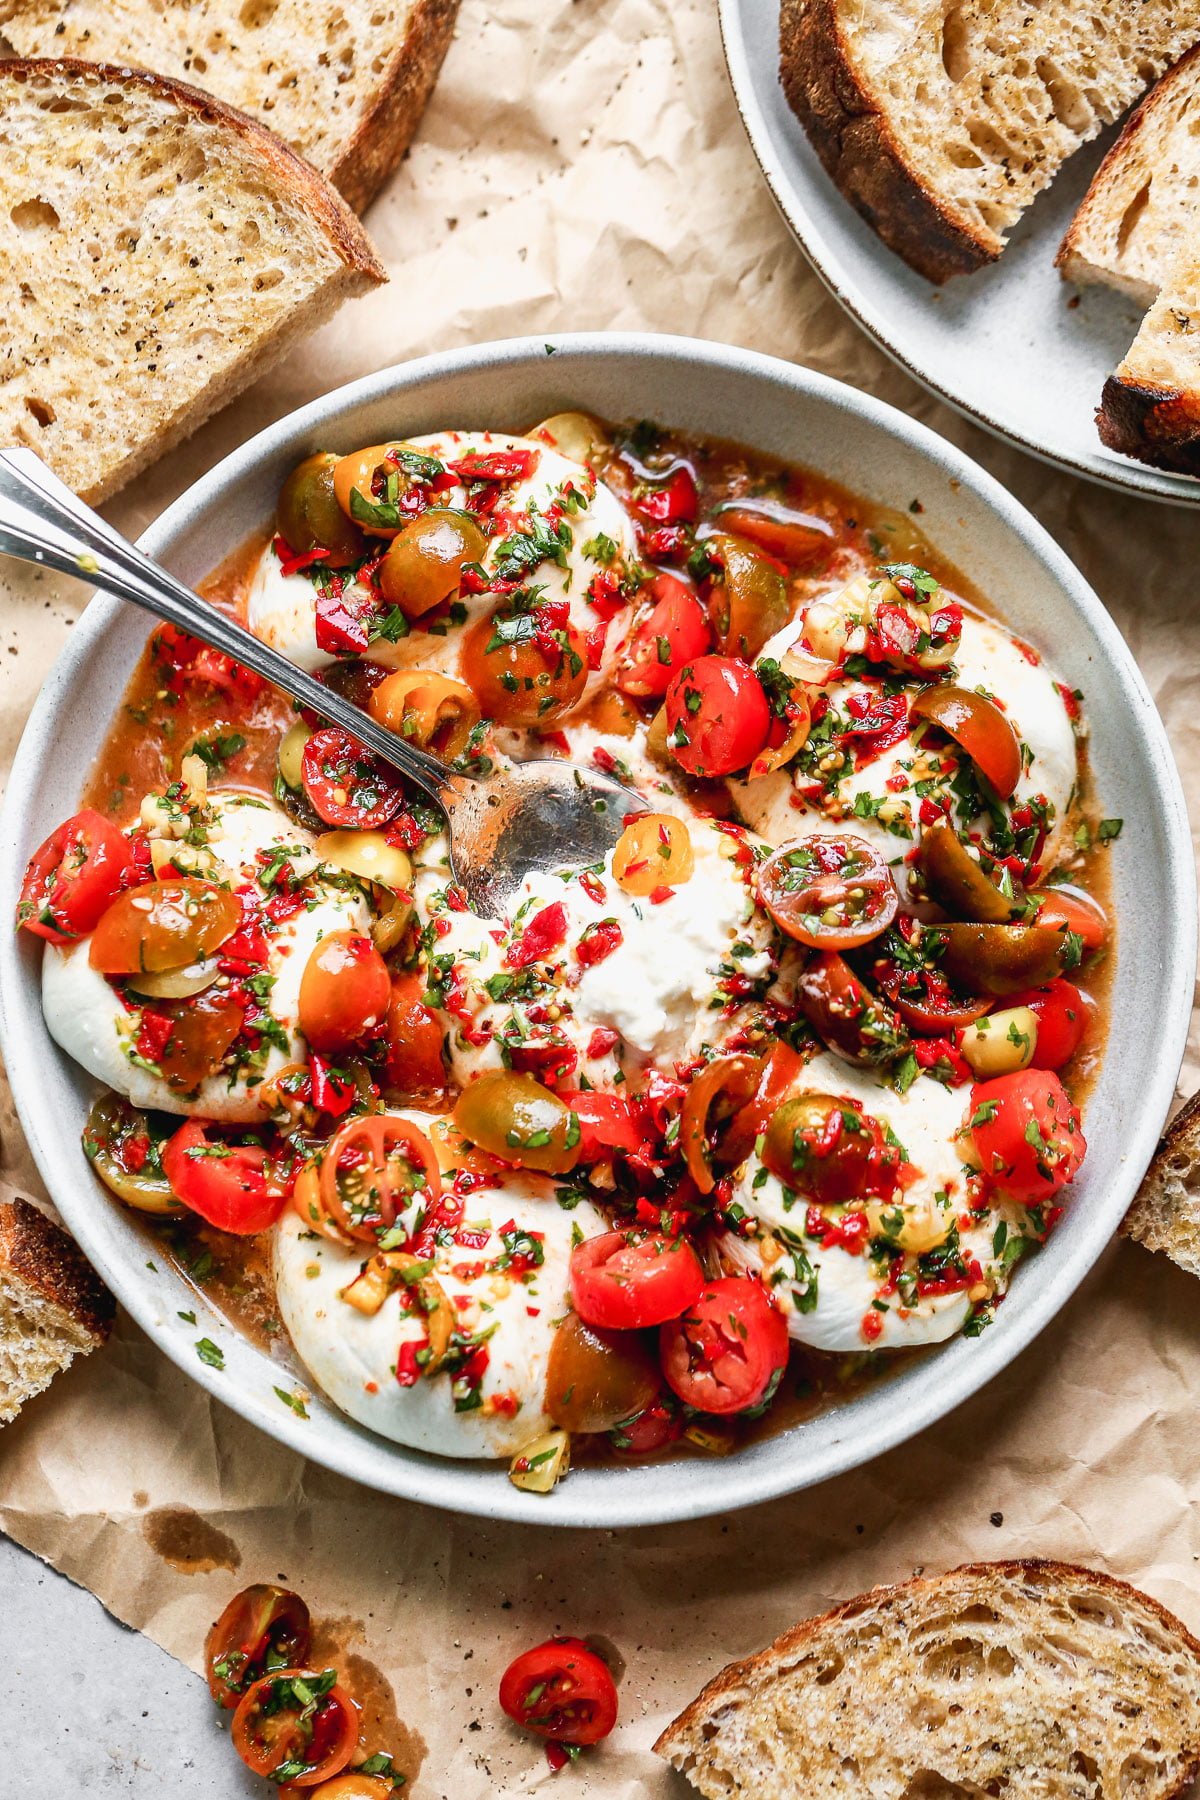 This Calabrian Chili and Burrata Appetizer is going to be the star of all your summer gatherings. This is basically a classic bruschetta but so so much better. We take juicy heirloom cherry tomatoes and toss them with fiery calabrian chilis, zippy red wine vinegar, parsley, garlic, and a few briny capers. We spoon it over the most adorable mini creamy burrata balls and serve with crusty bread to soak up every juicy bite.&nbsp;